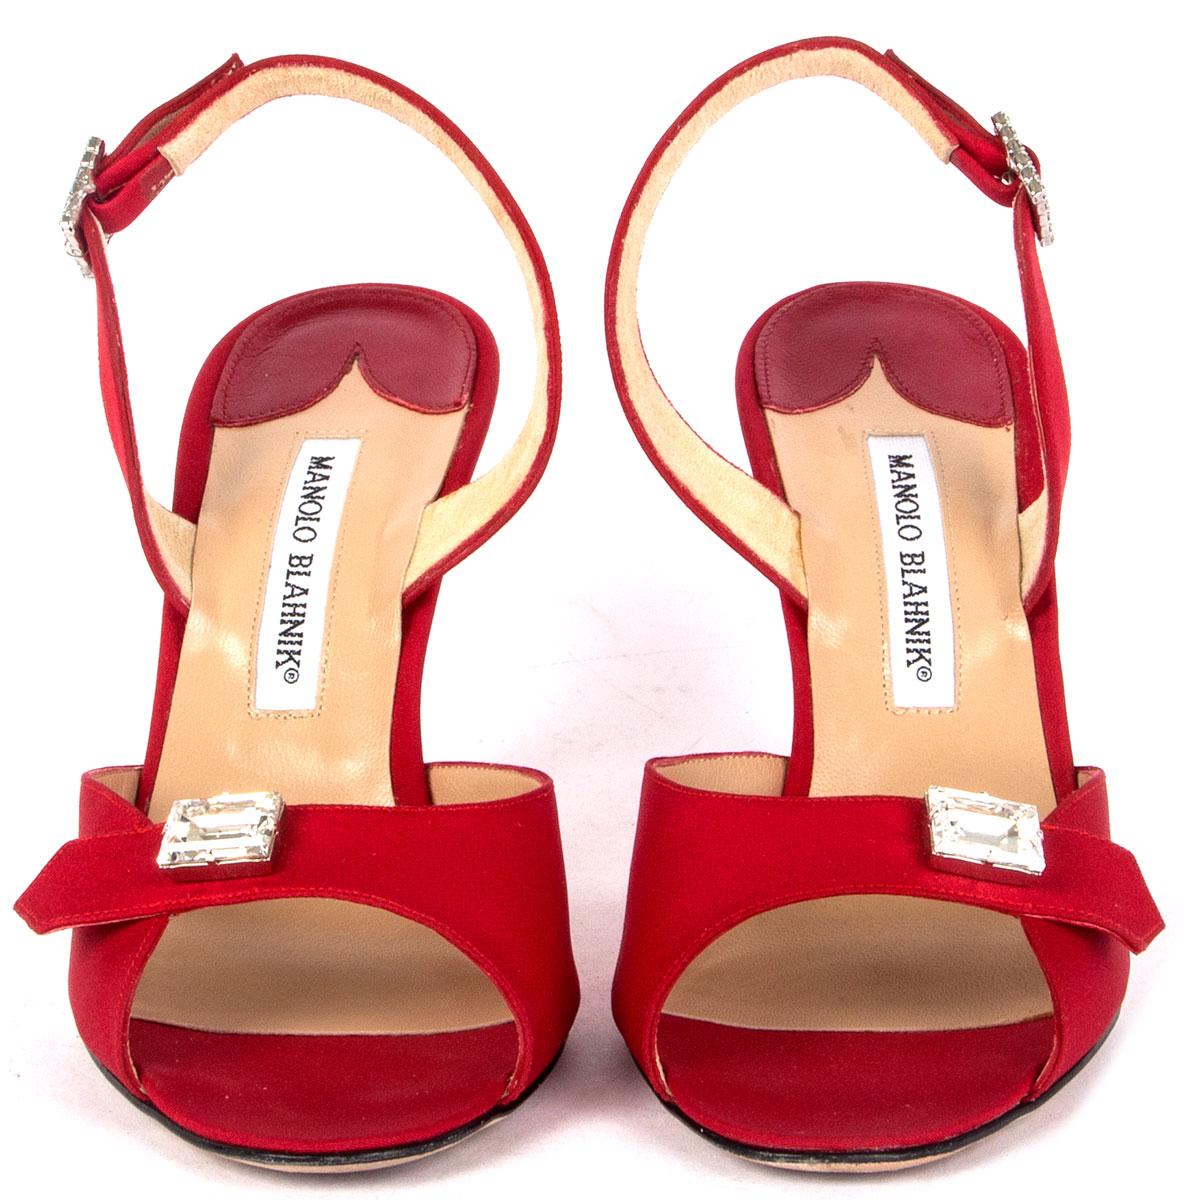 100% authentic Manolo Blahnik sandals in red silk embellished with crystals. Have been worn and are in excellent condition. 

Imprinted Size	38.5
Shoe Size	38.5
Inside Sole	25cm (9.8in)
Width	7.5cm (2.9in)
Heel	9cm (3.5in)

All our listings include